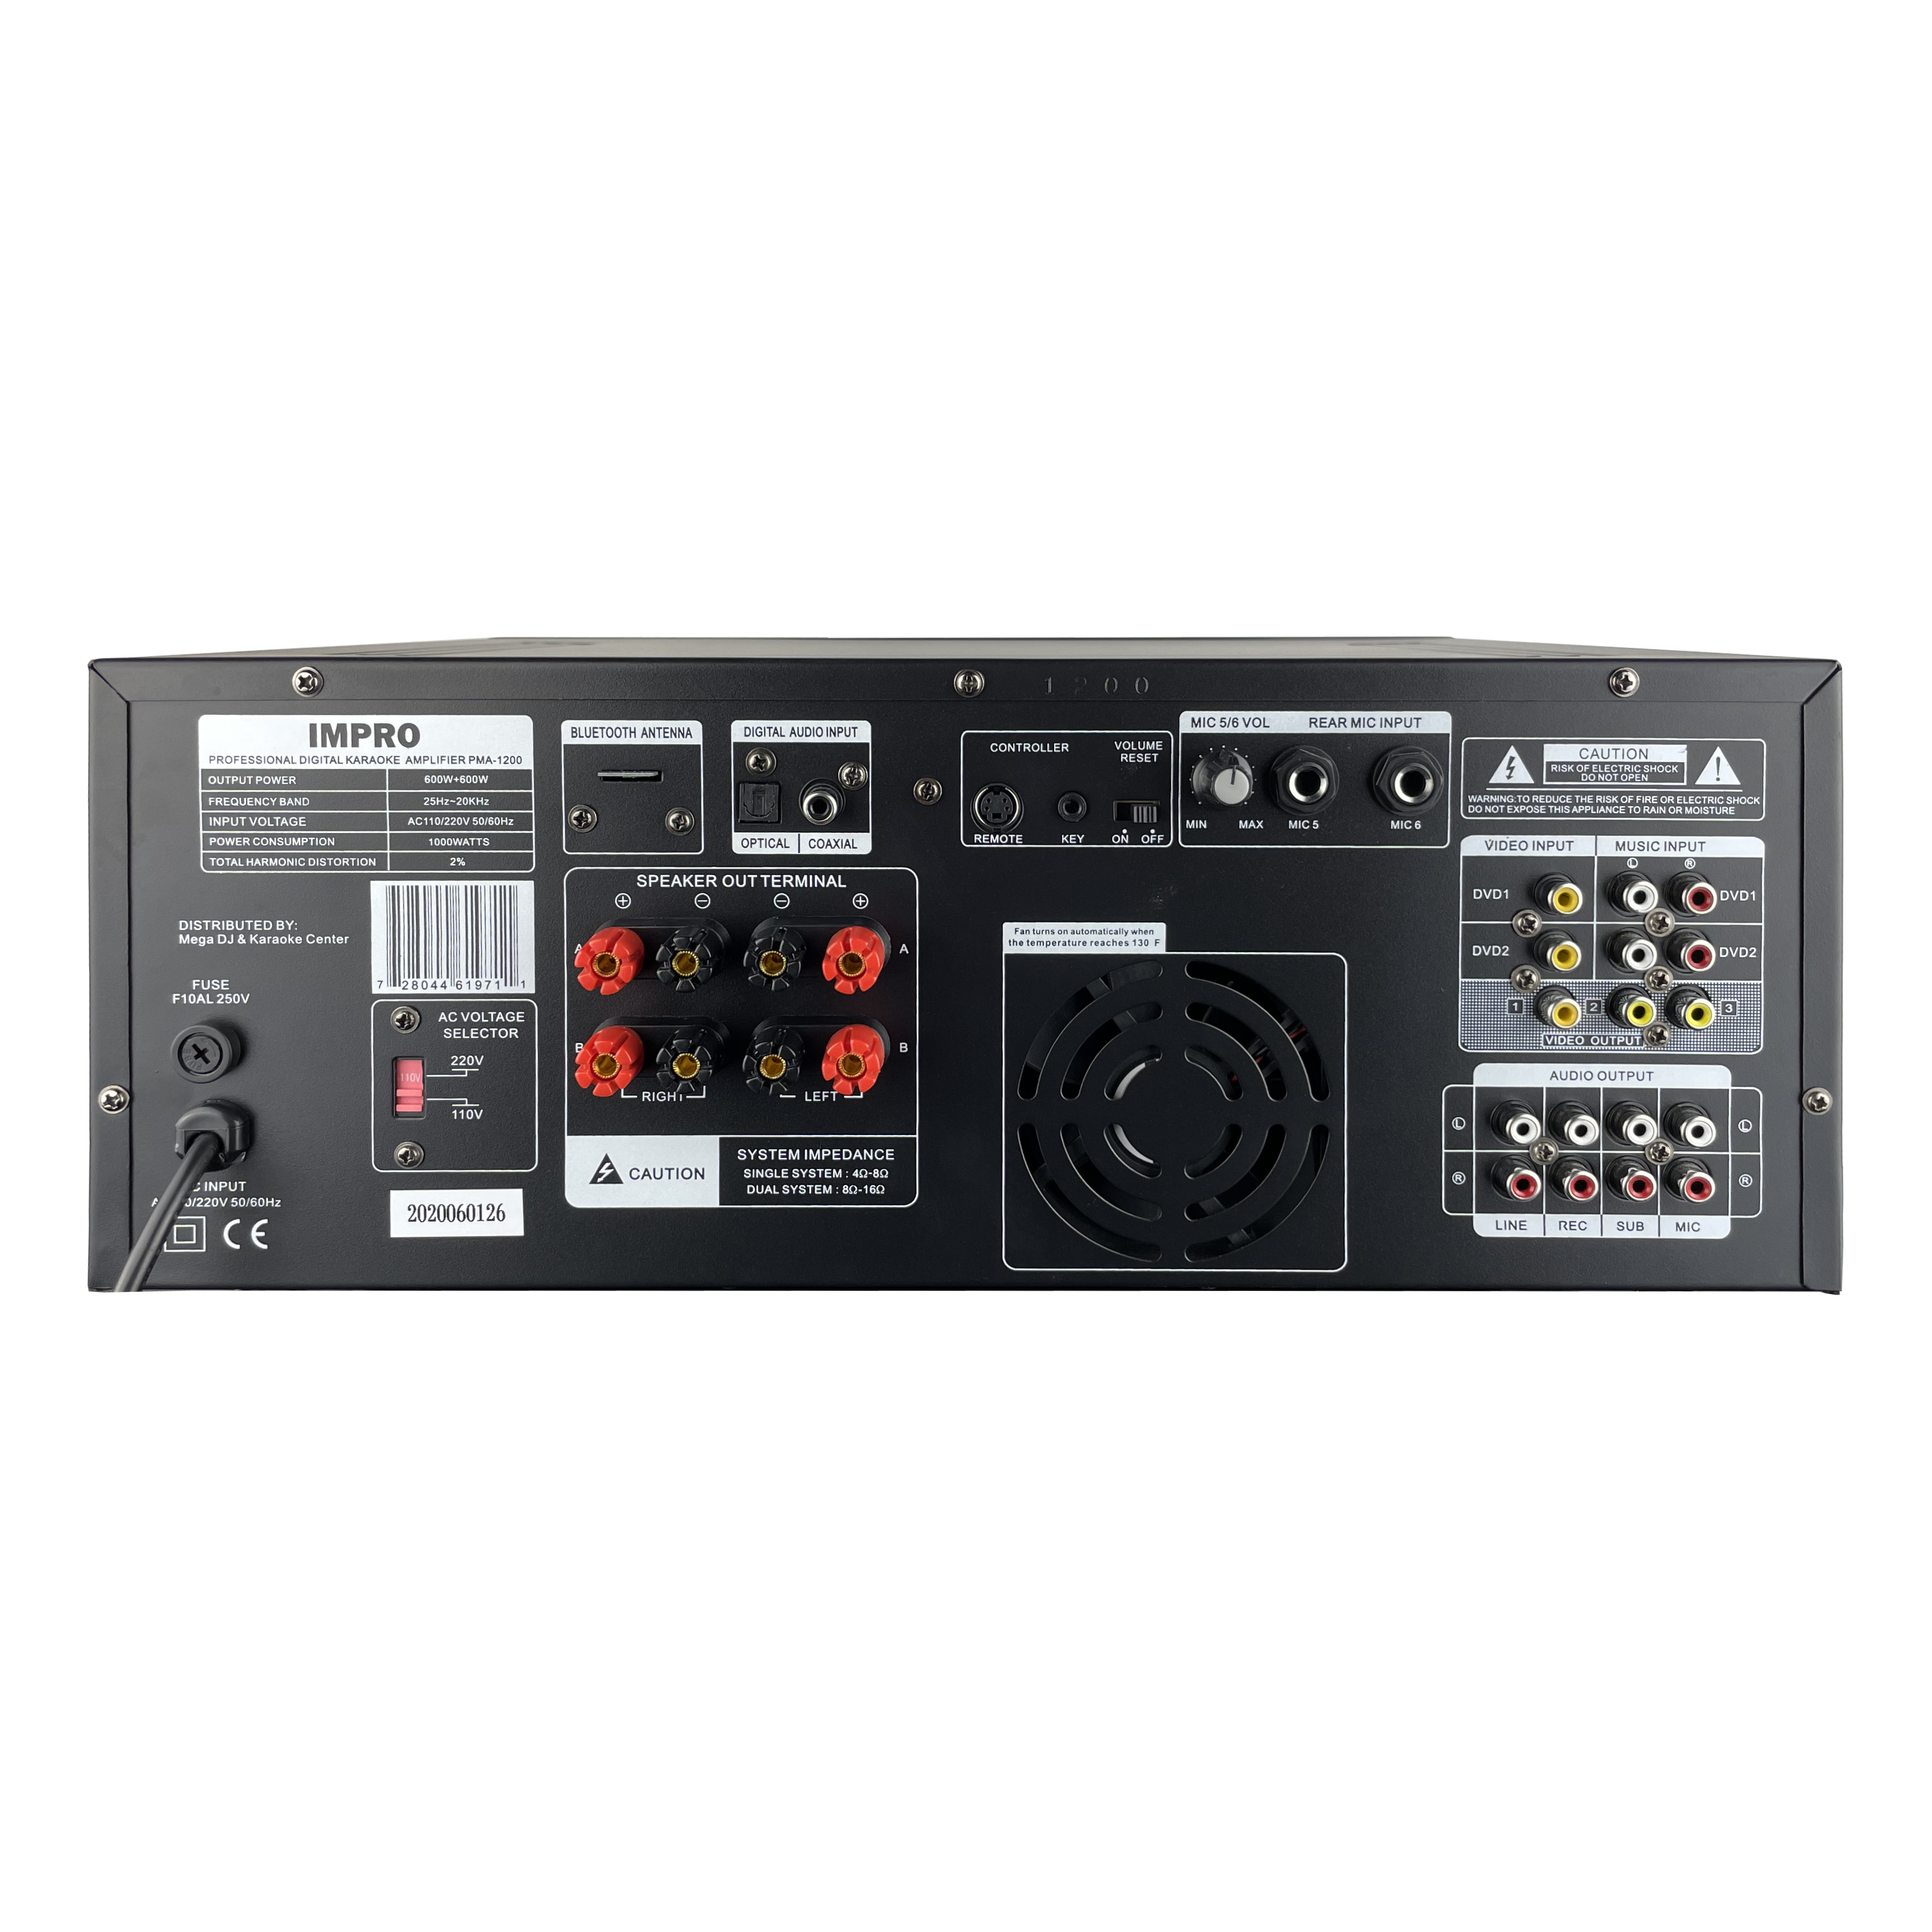 ImPro House Party Bundle Plus with Mixing Amplifier, Speakers, Microphones, and Accessories (5 Items)